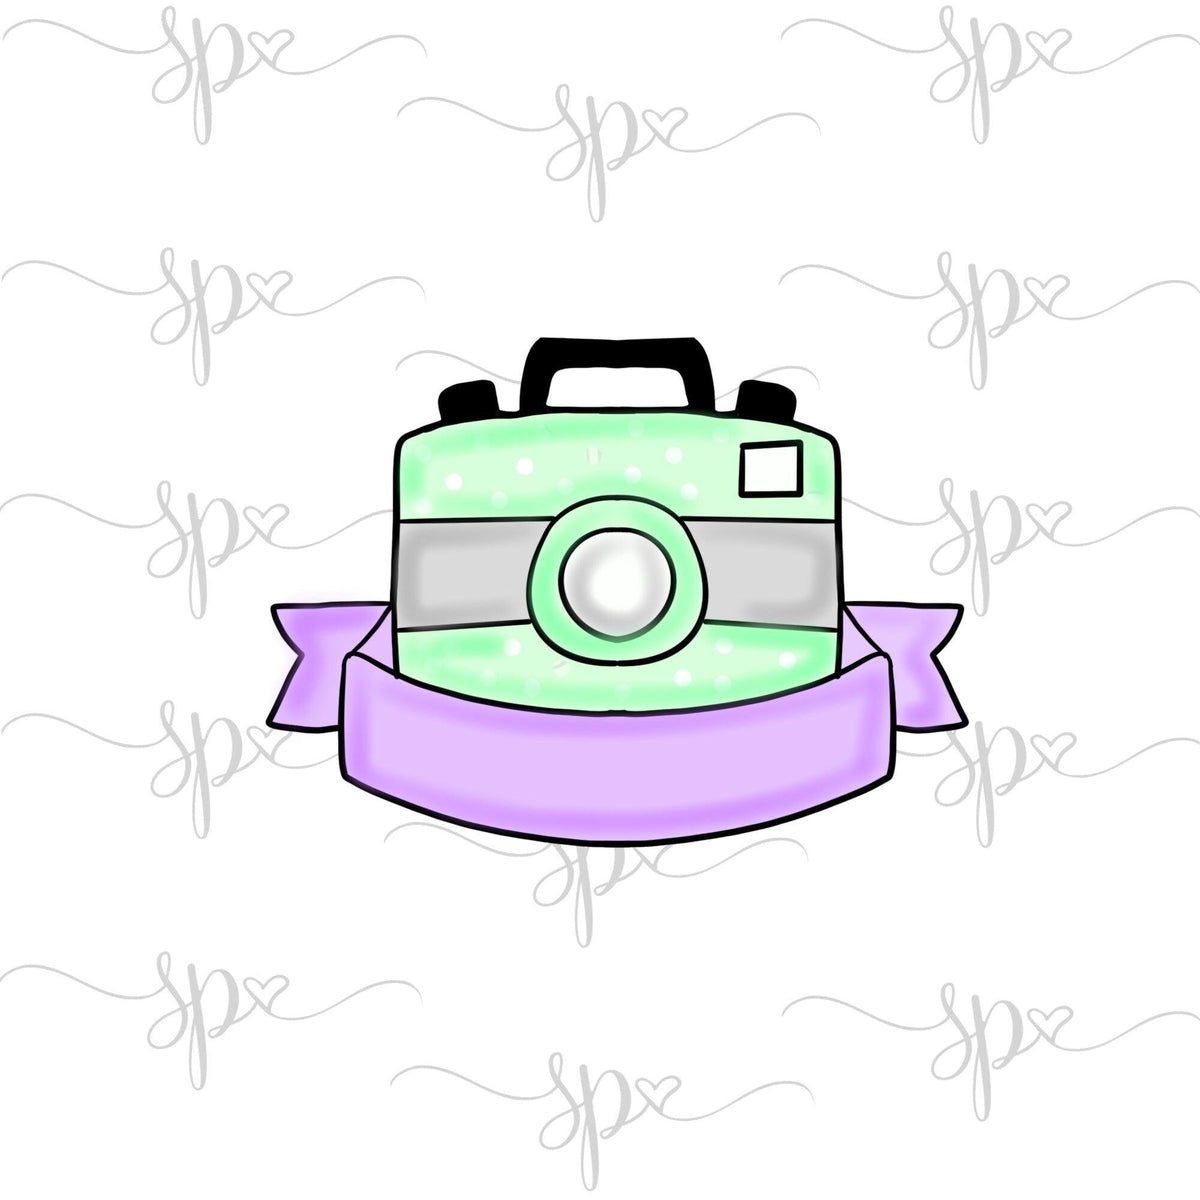 Camera with Banner Cookie Cutter - Sweetleigh 